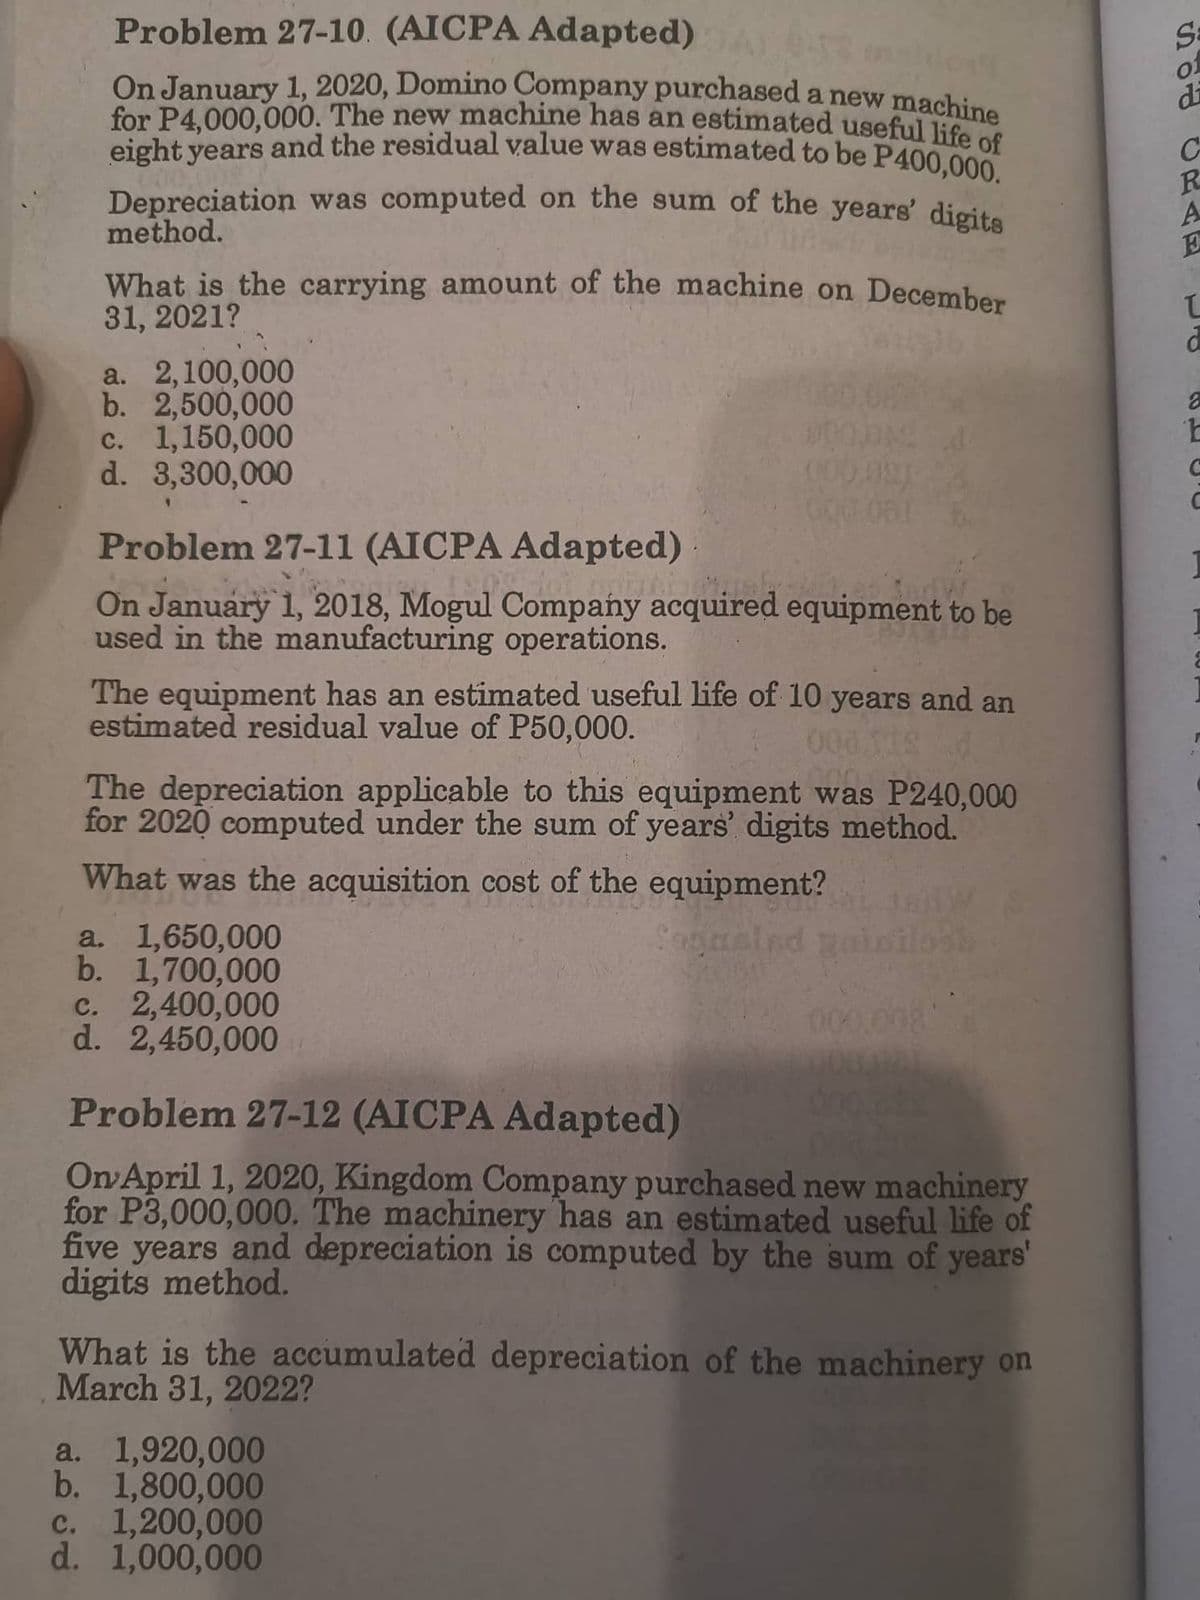 Problem 27-10. (AICPA Adapted)
On January 1, 2020, Domino Company purchased a new machine
for P4,000,000. The new machine has an estimated useful life of
eight years and the residual value was estimated to be P400,000.
Depreciation was computed on the sum of the years' digits
method.
What is the carrying amount of the machine on December
31, 2021?
a. 2,100,000
b. 2,500,000
c. 1,150,000
000 d
000 091
d. 3,300,000
000 061
Problem 27-11 (AICPA Adapted)
27 1903
Marta
On January 1, 2018, Mogul Company acquired equipment to be
used in the manufacturing operations.
The equipment has an estimated useful life of 10 years and an
estimated residual value of P50,000.
000 112 d
The depreciation applicable to this equipment was P240,000
for 2020 computed under the sum of years' digits method.
What was the acquisition cost of the equipment?
a. 1,650,000
gasind
b. 1,700,000
c. 2,400,000
d. 2,450,000
Problem 27-12 (AICPA Adapted)
On April 1, 2020, Kingdom Company purchased new machinery
for P3,000,000. The machinery has an estimated useful life of
five years and depreciation is computed by the sum of years'
digits method.
What is the accumulated depreciation of the machinery on
March 31, 2022?
a. 1,920,000
b. 1,800,000
c. 1,200,000
d. 1,000,000
SUD CRAE
Sa
01
di
с
2
t
С